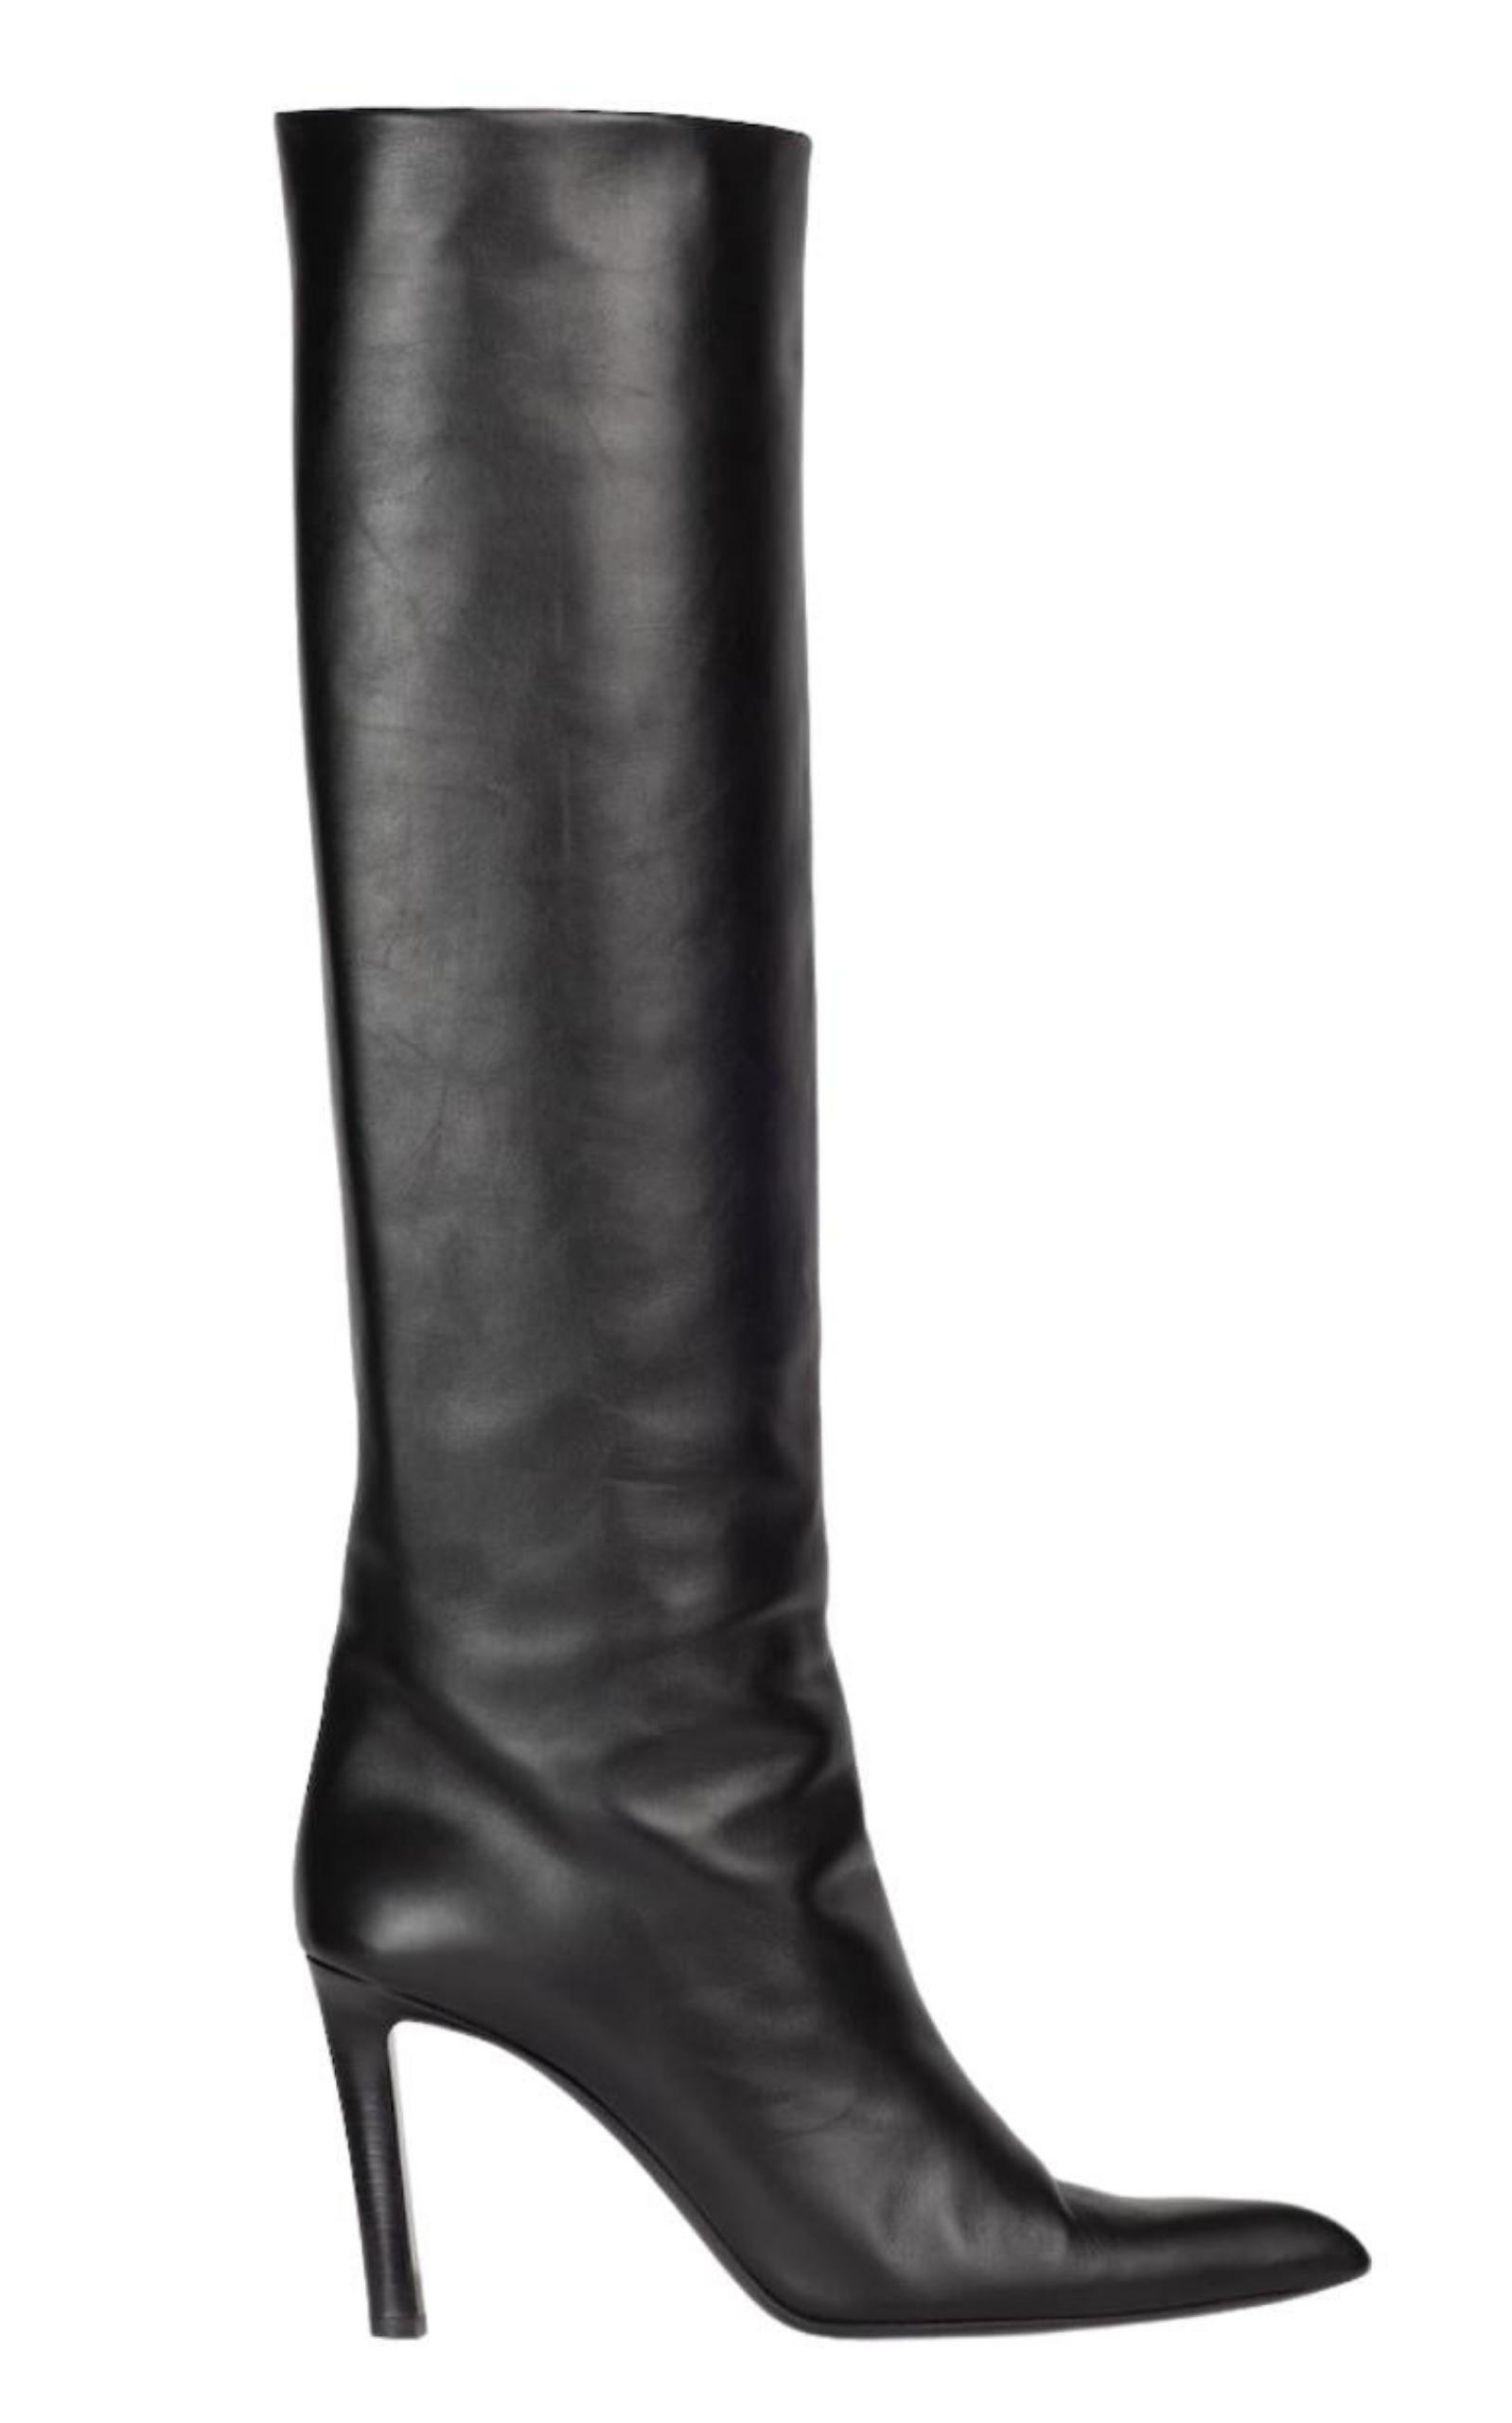 Saint Laurent Shoes | Kidd Knee High Leather Boots / Booties, Black, (Size It 36.5 (US 6.5), New | Tradesy